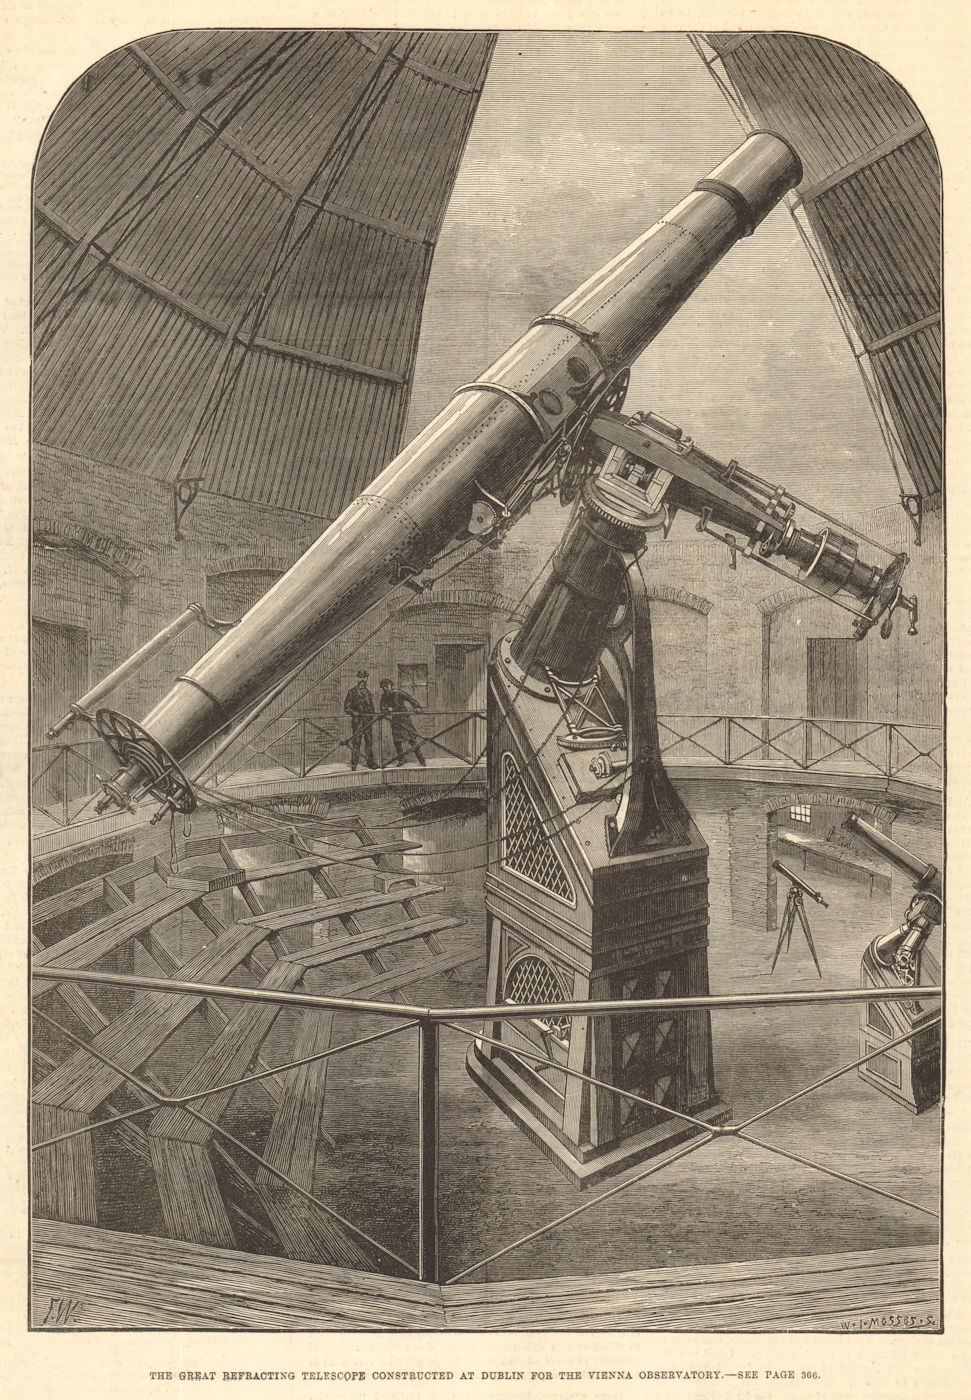 Associate Product The refracting telescope constructed in Dublin for the Vienna observatory 1881